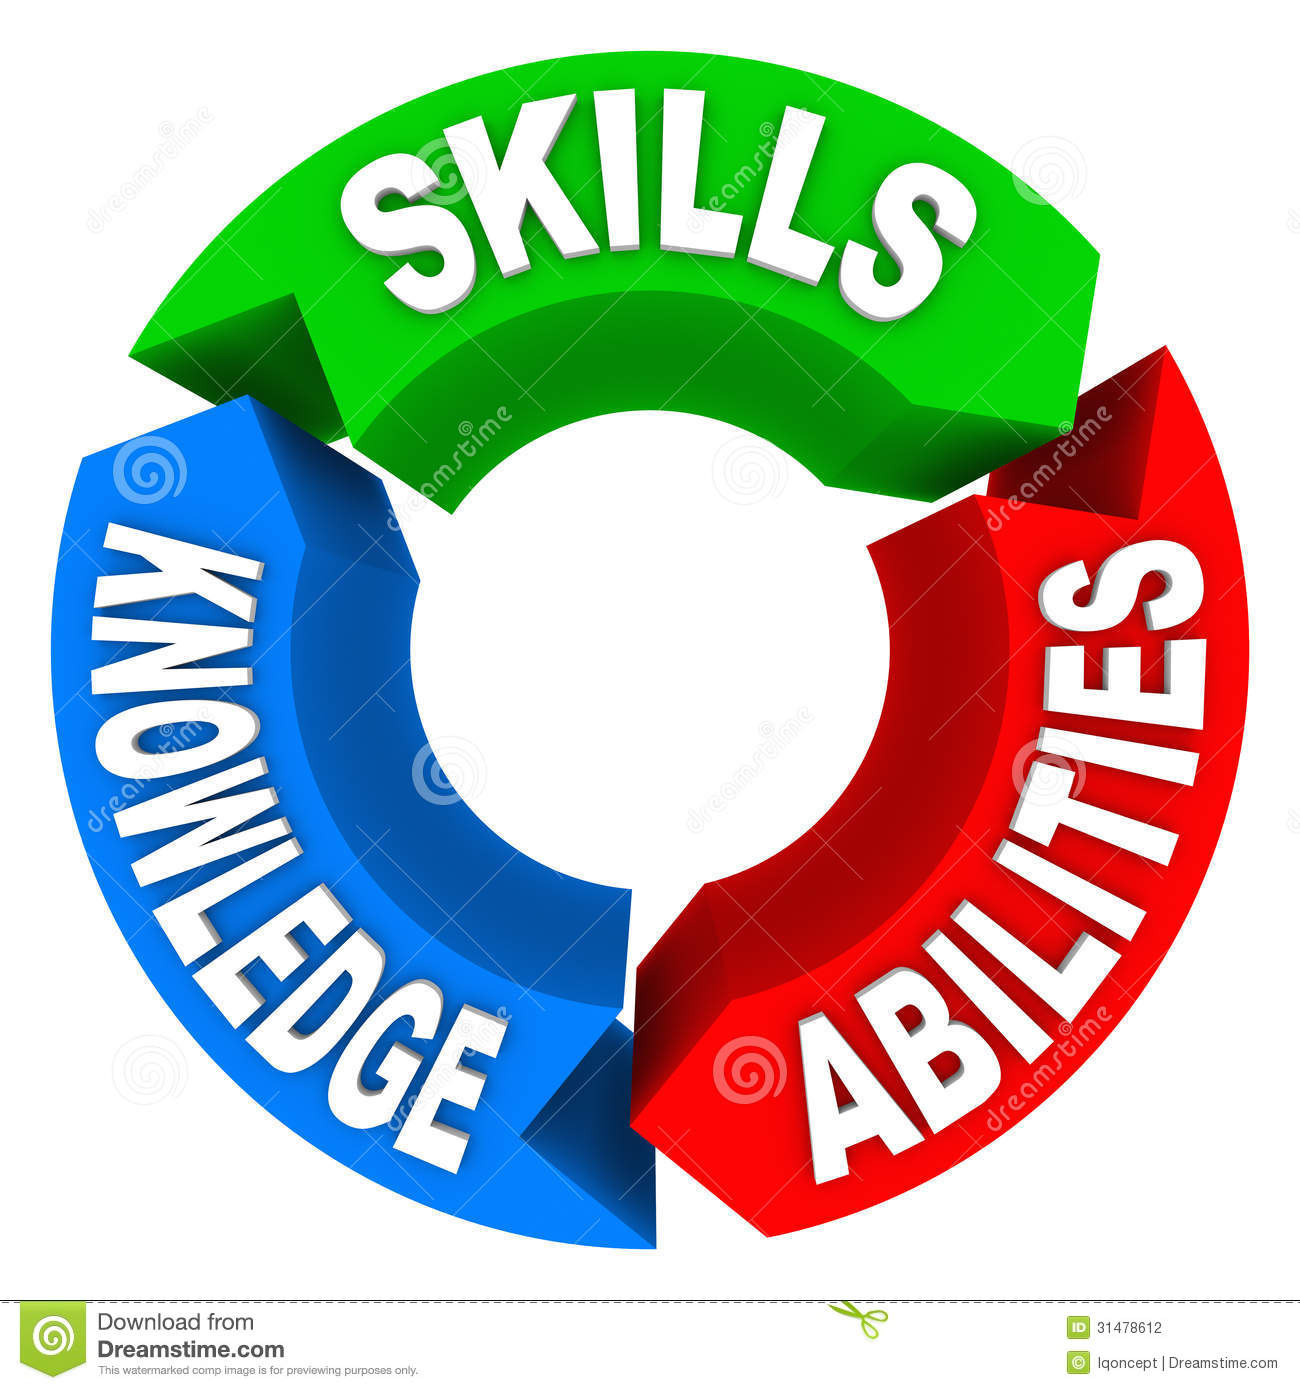 Three Qualities Or Criteria That Are Essential For A Job Candidate Or